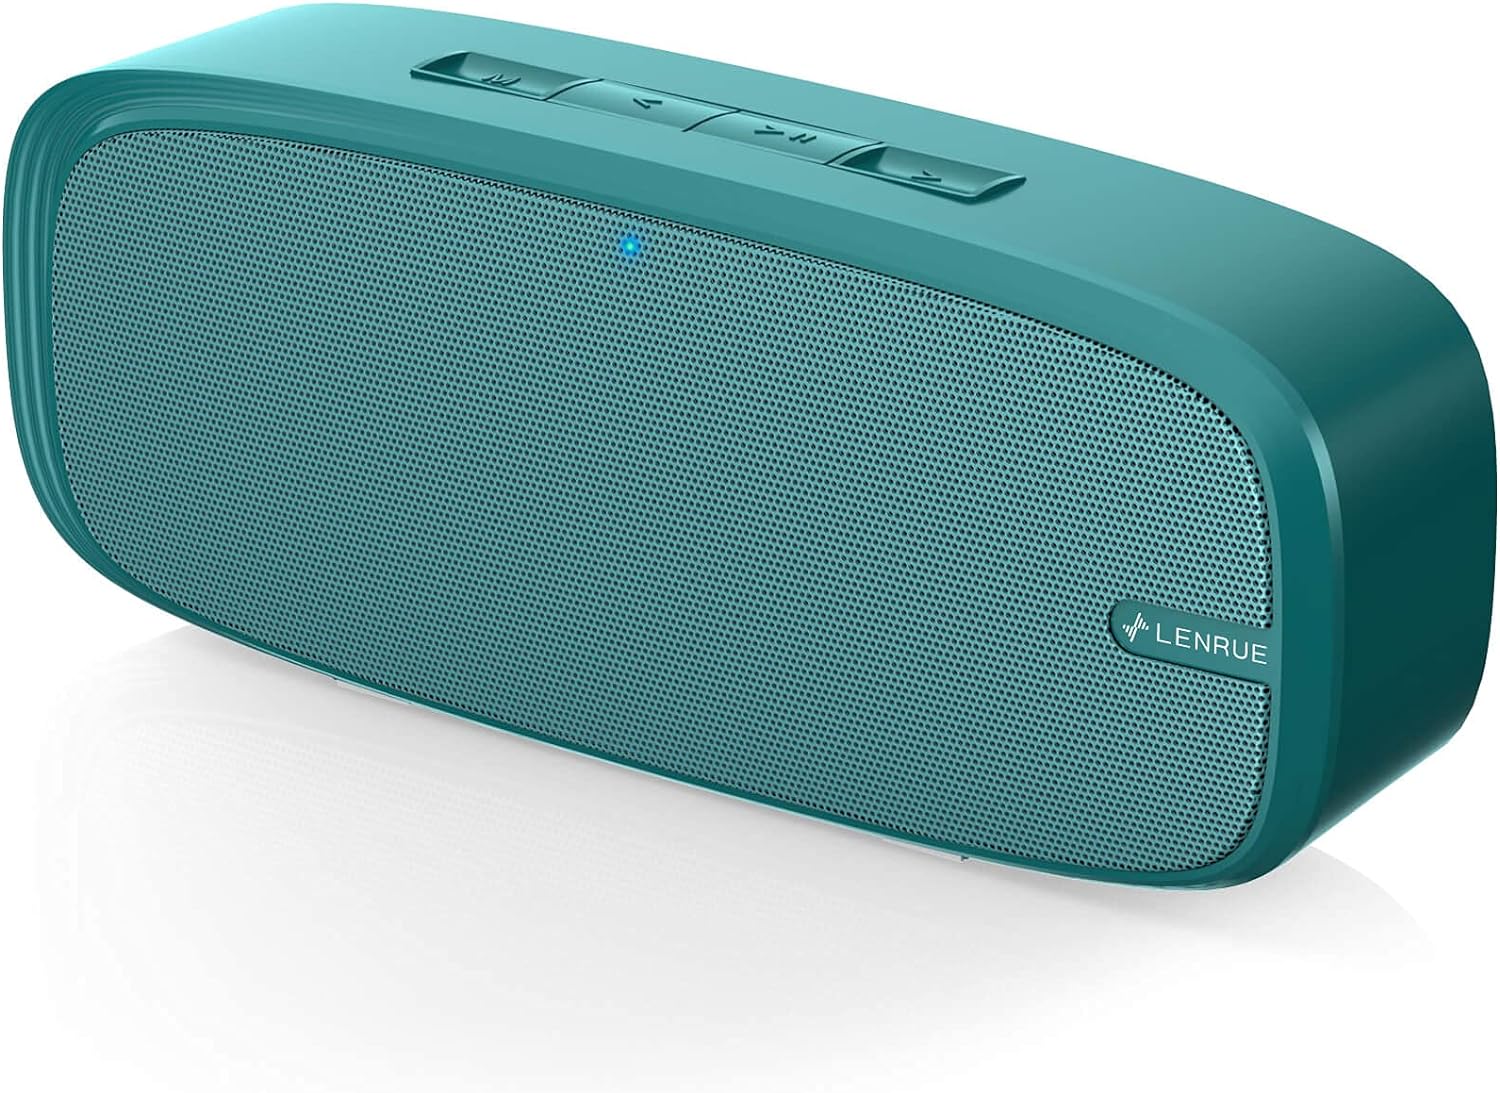 LENRUE Bluetooth Speaker, Wireless Portable Speaker with Loud Stereo Sound, Rich Bass, 12-Hour Playtime, Built-in Mic. Perfect for iPhone, Samsung and More (Green)